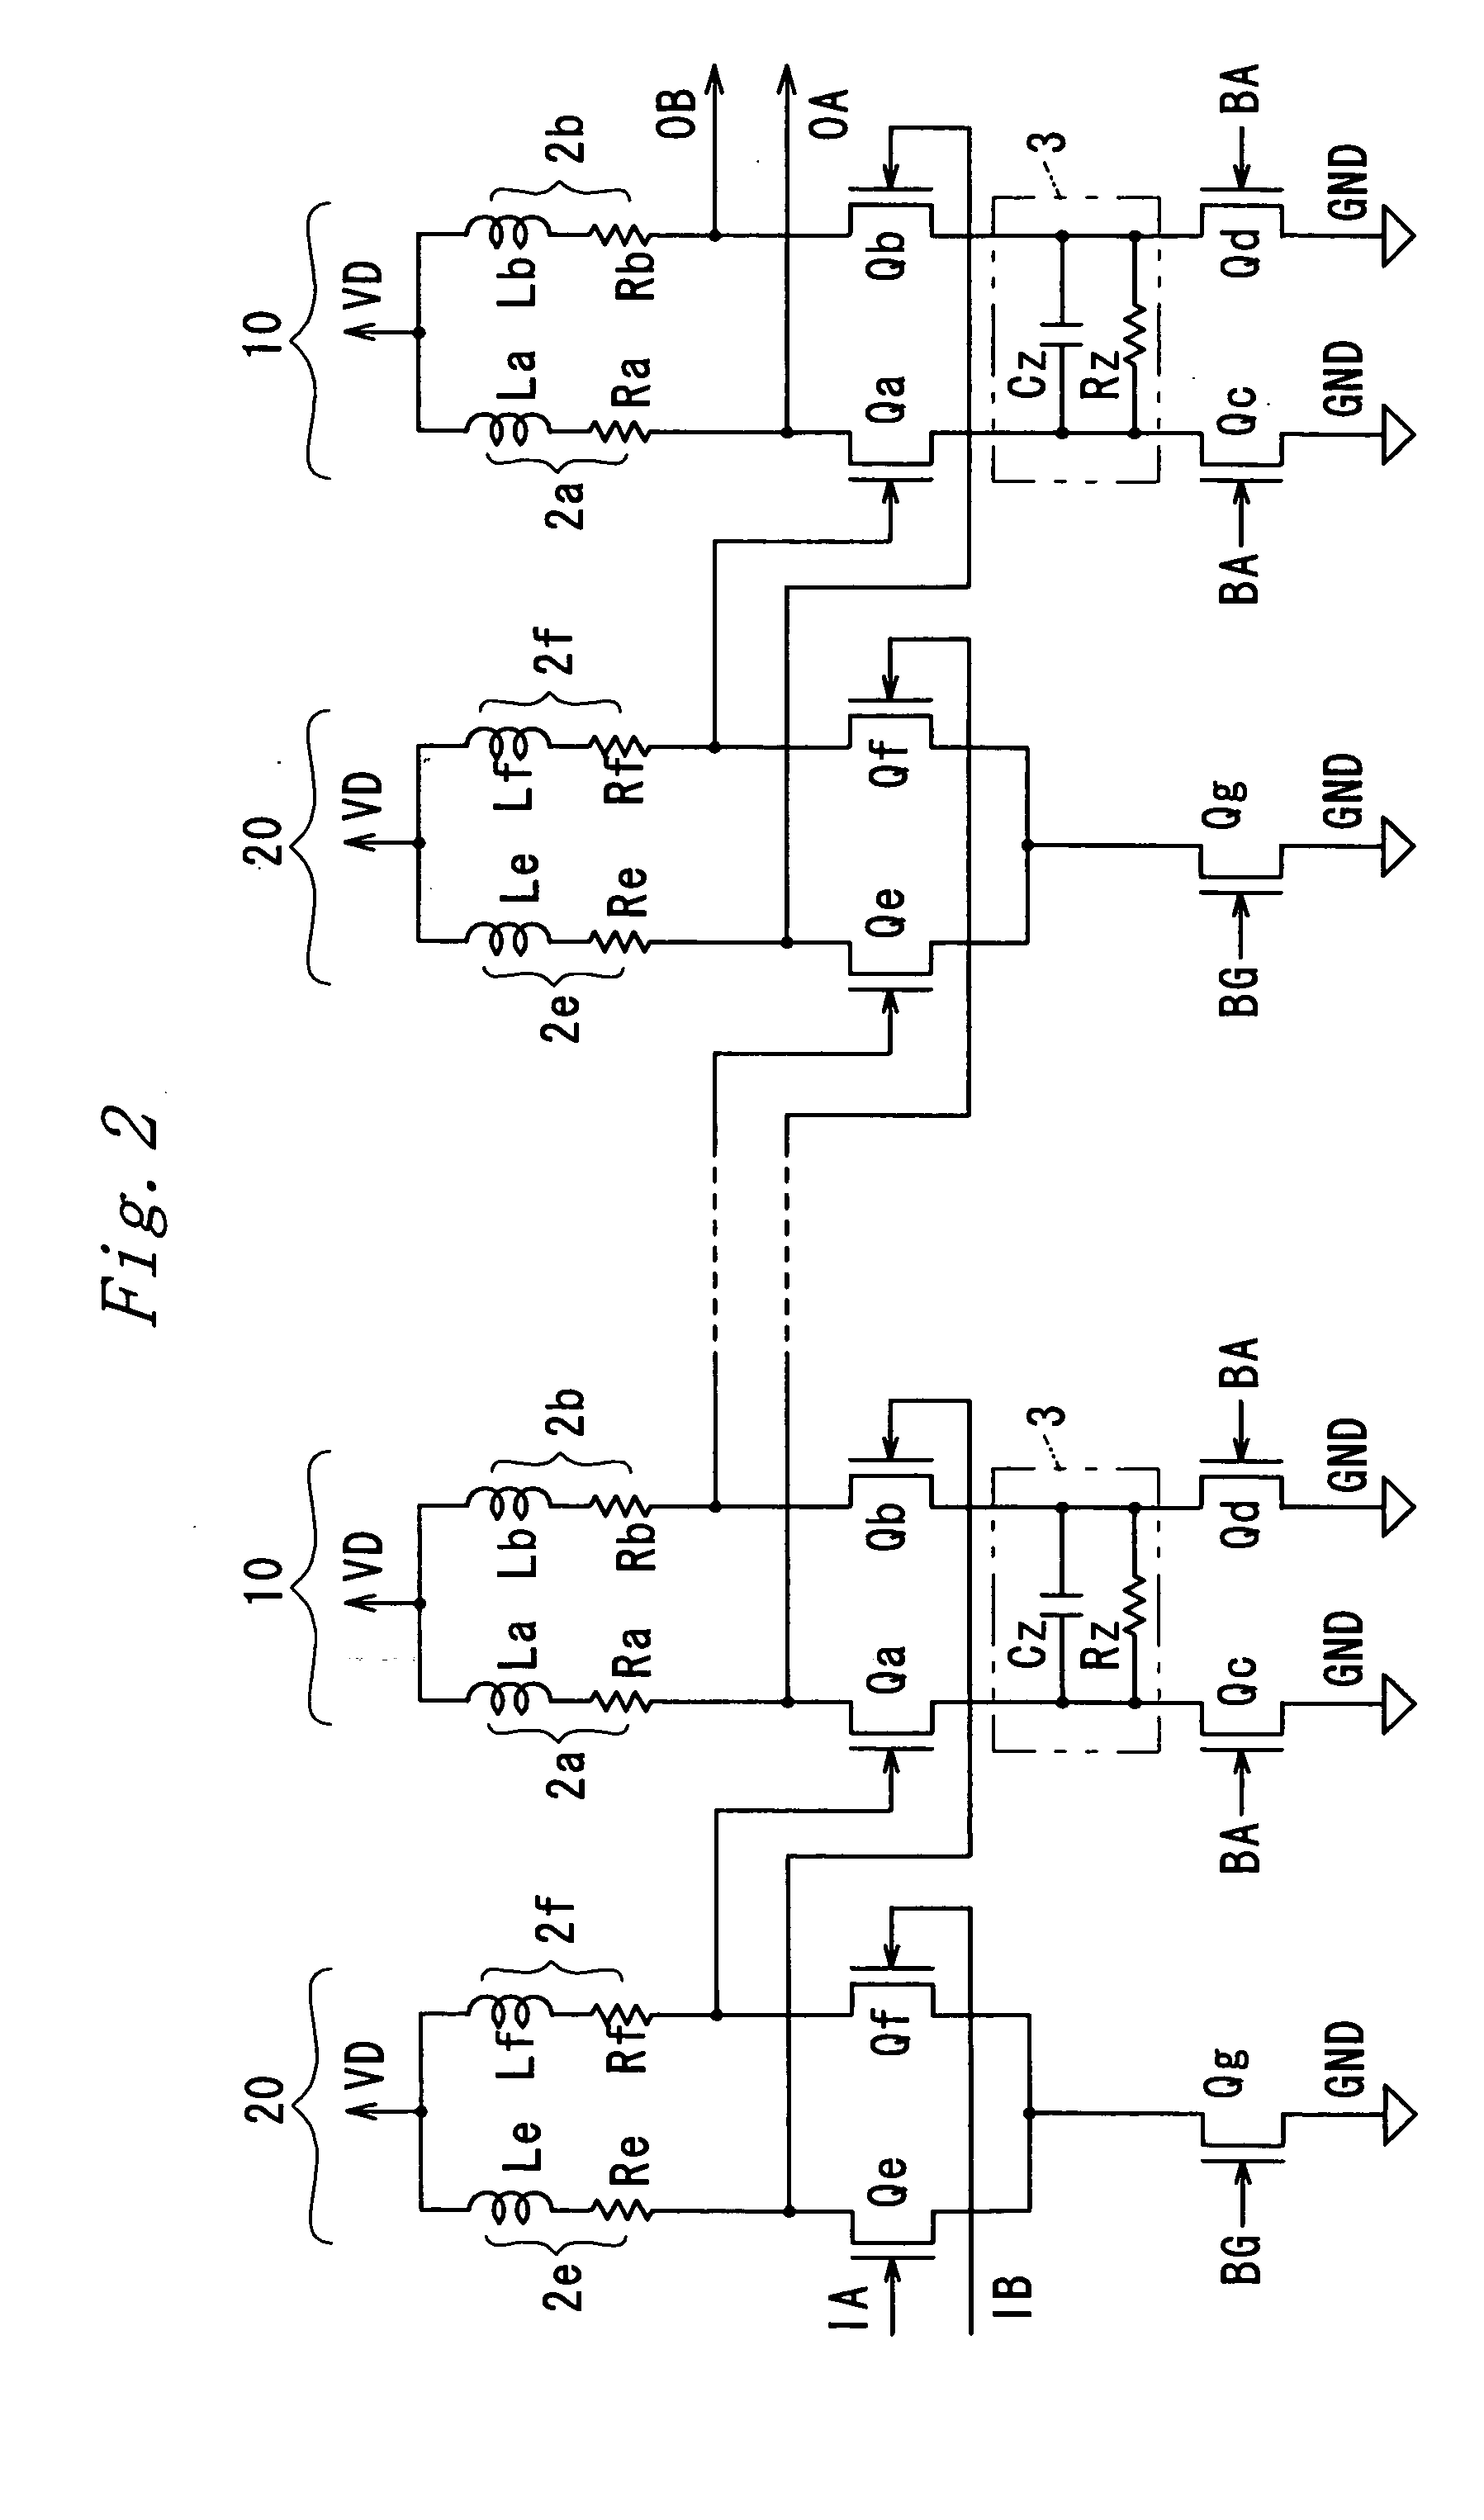 Differential amplifier circuit and multistage amplifier circuit